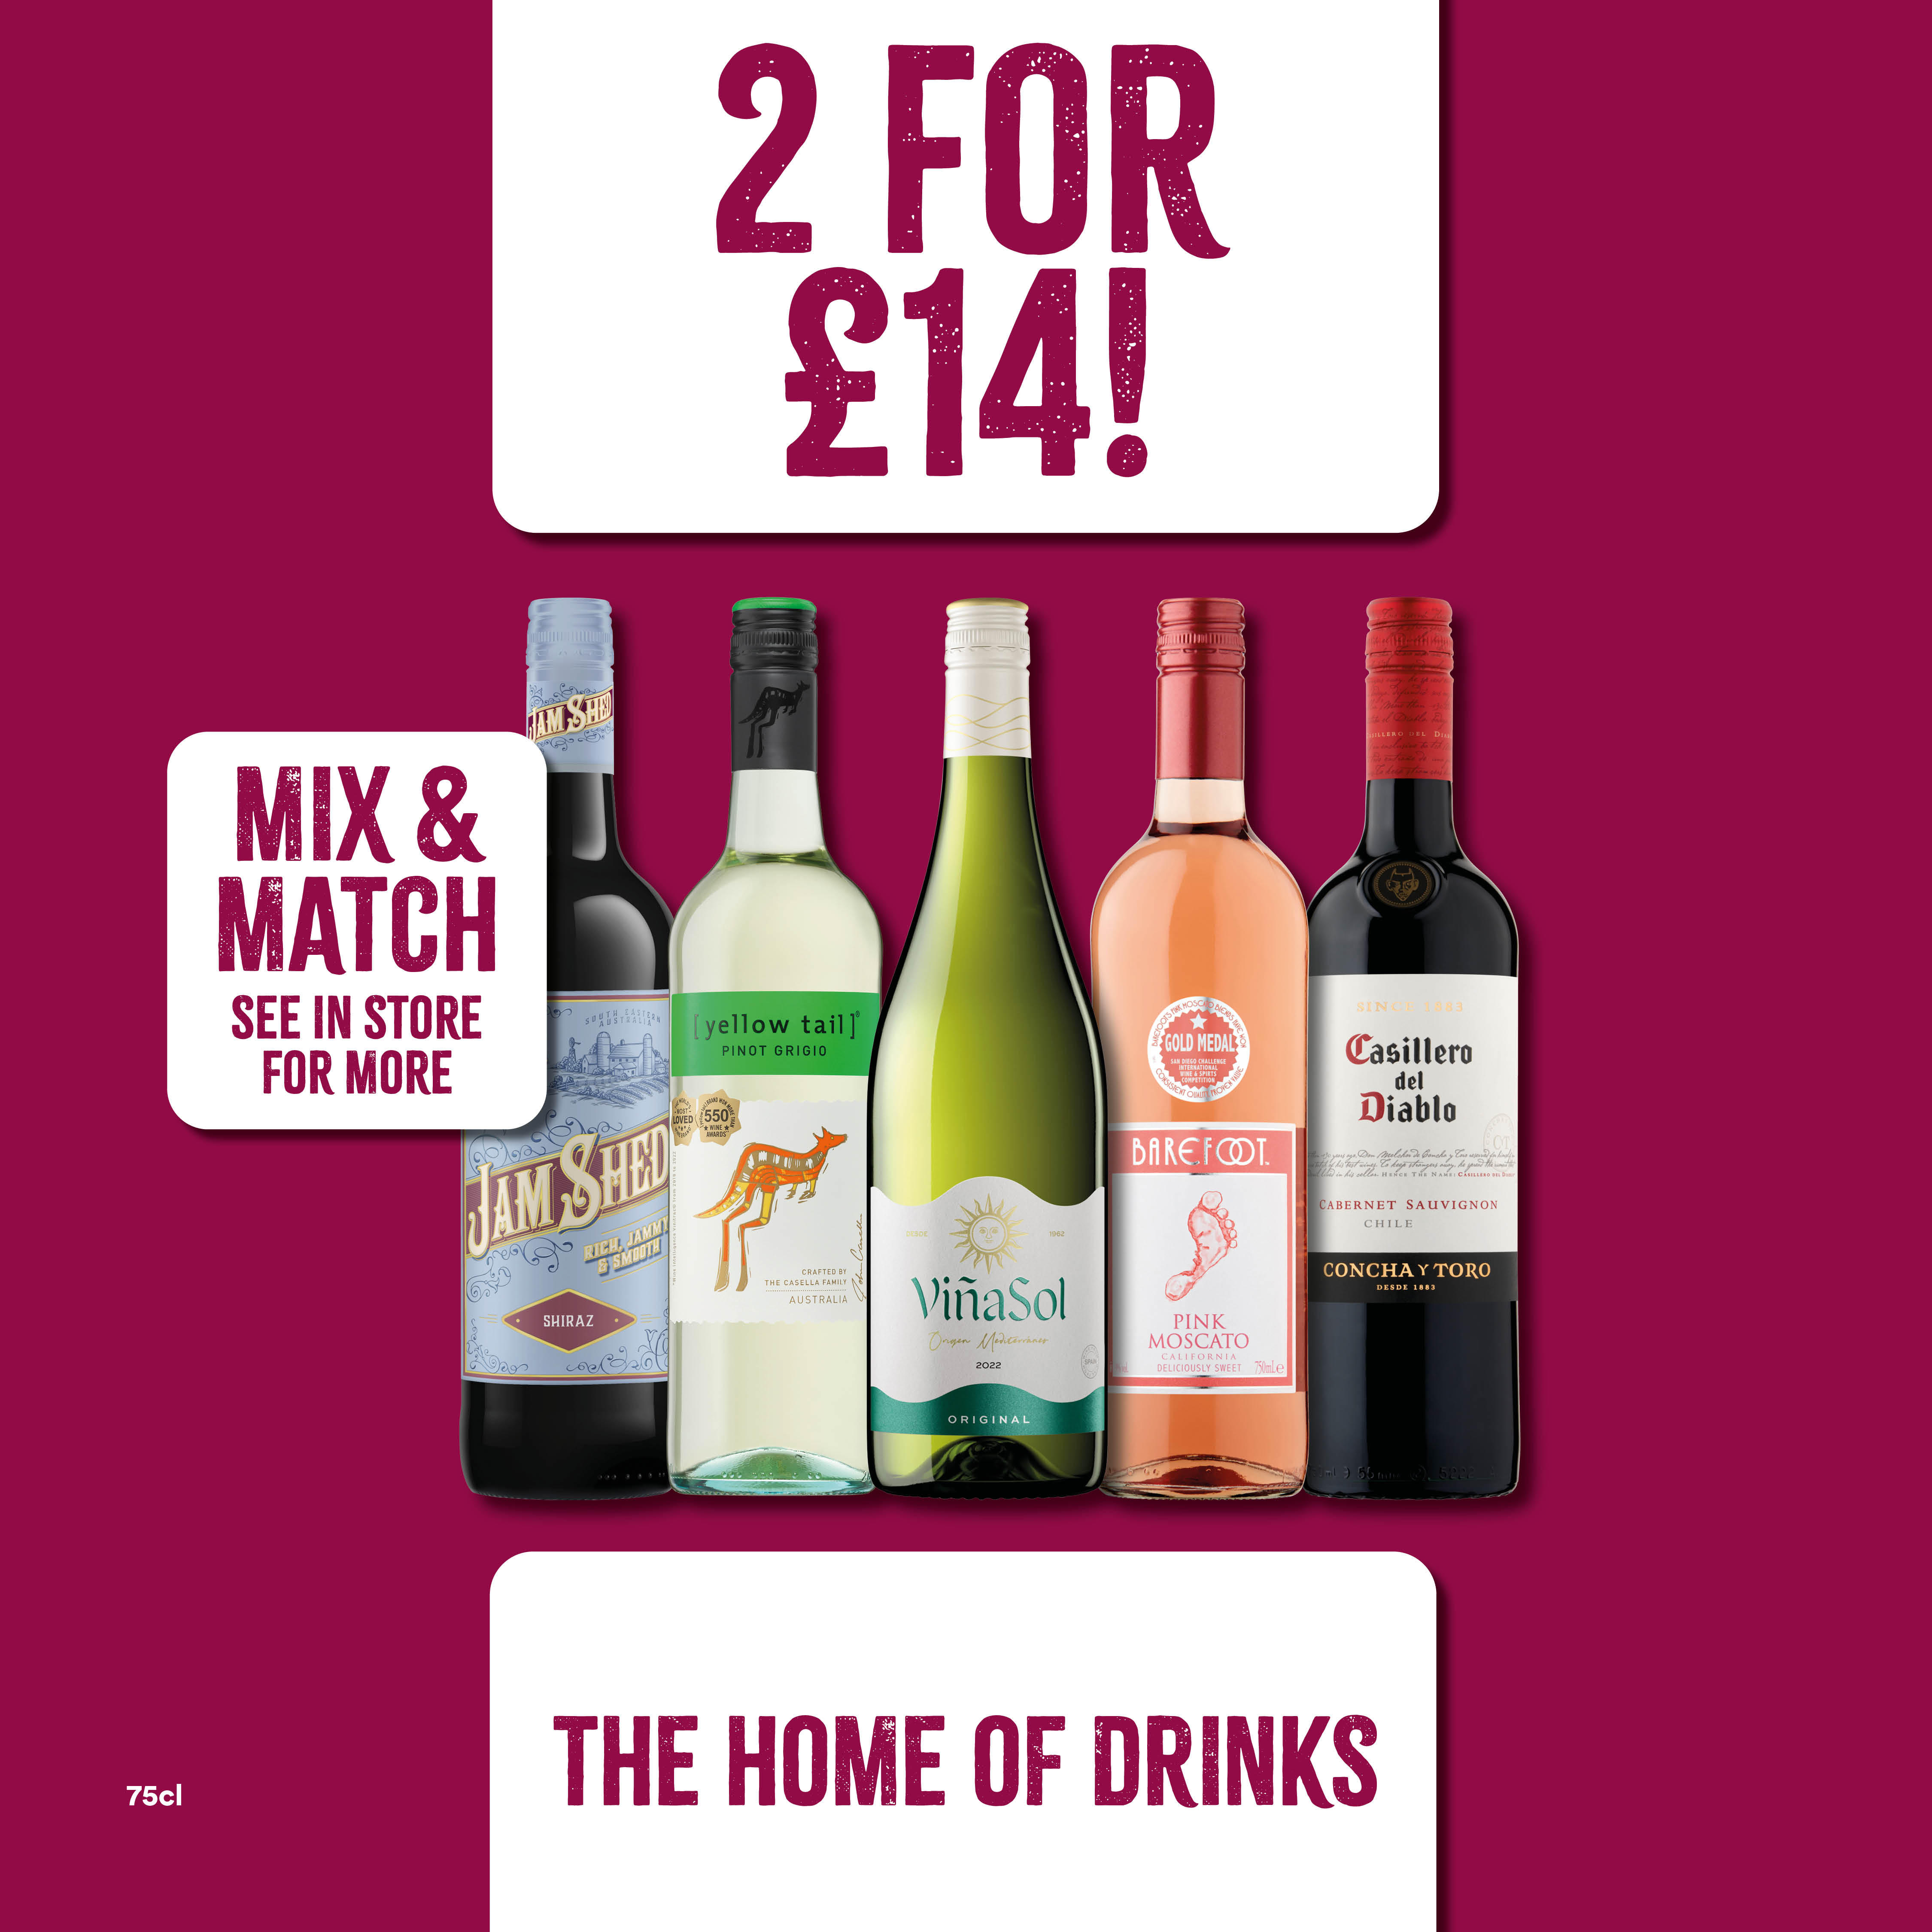 2 for £14 on selected wines Bargain Booze Holmes Chapel 01477 537193